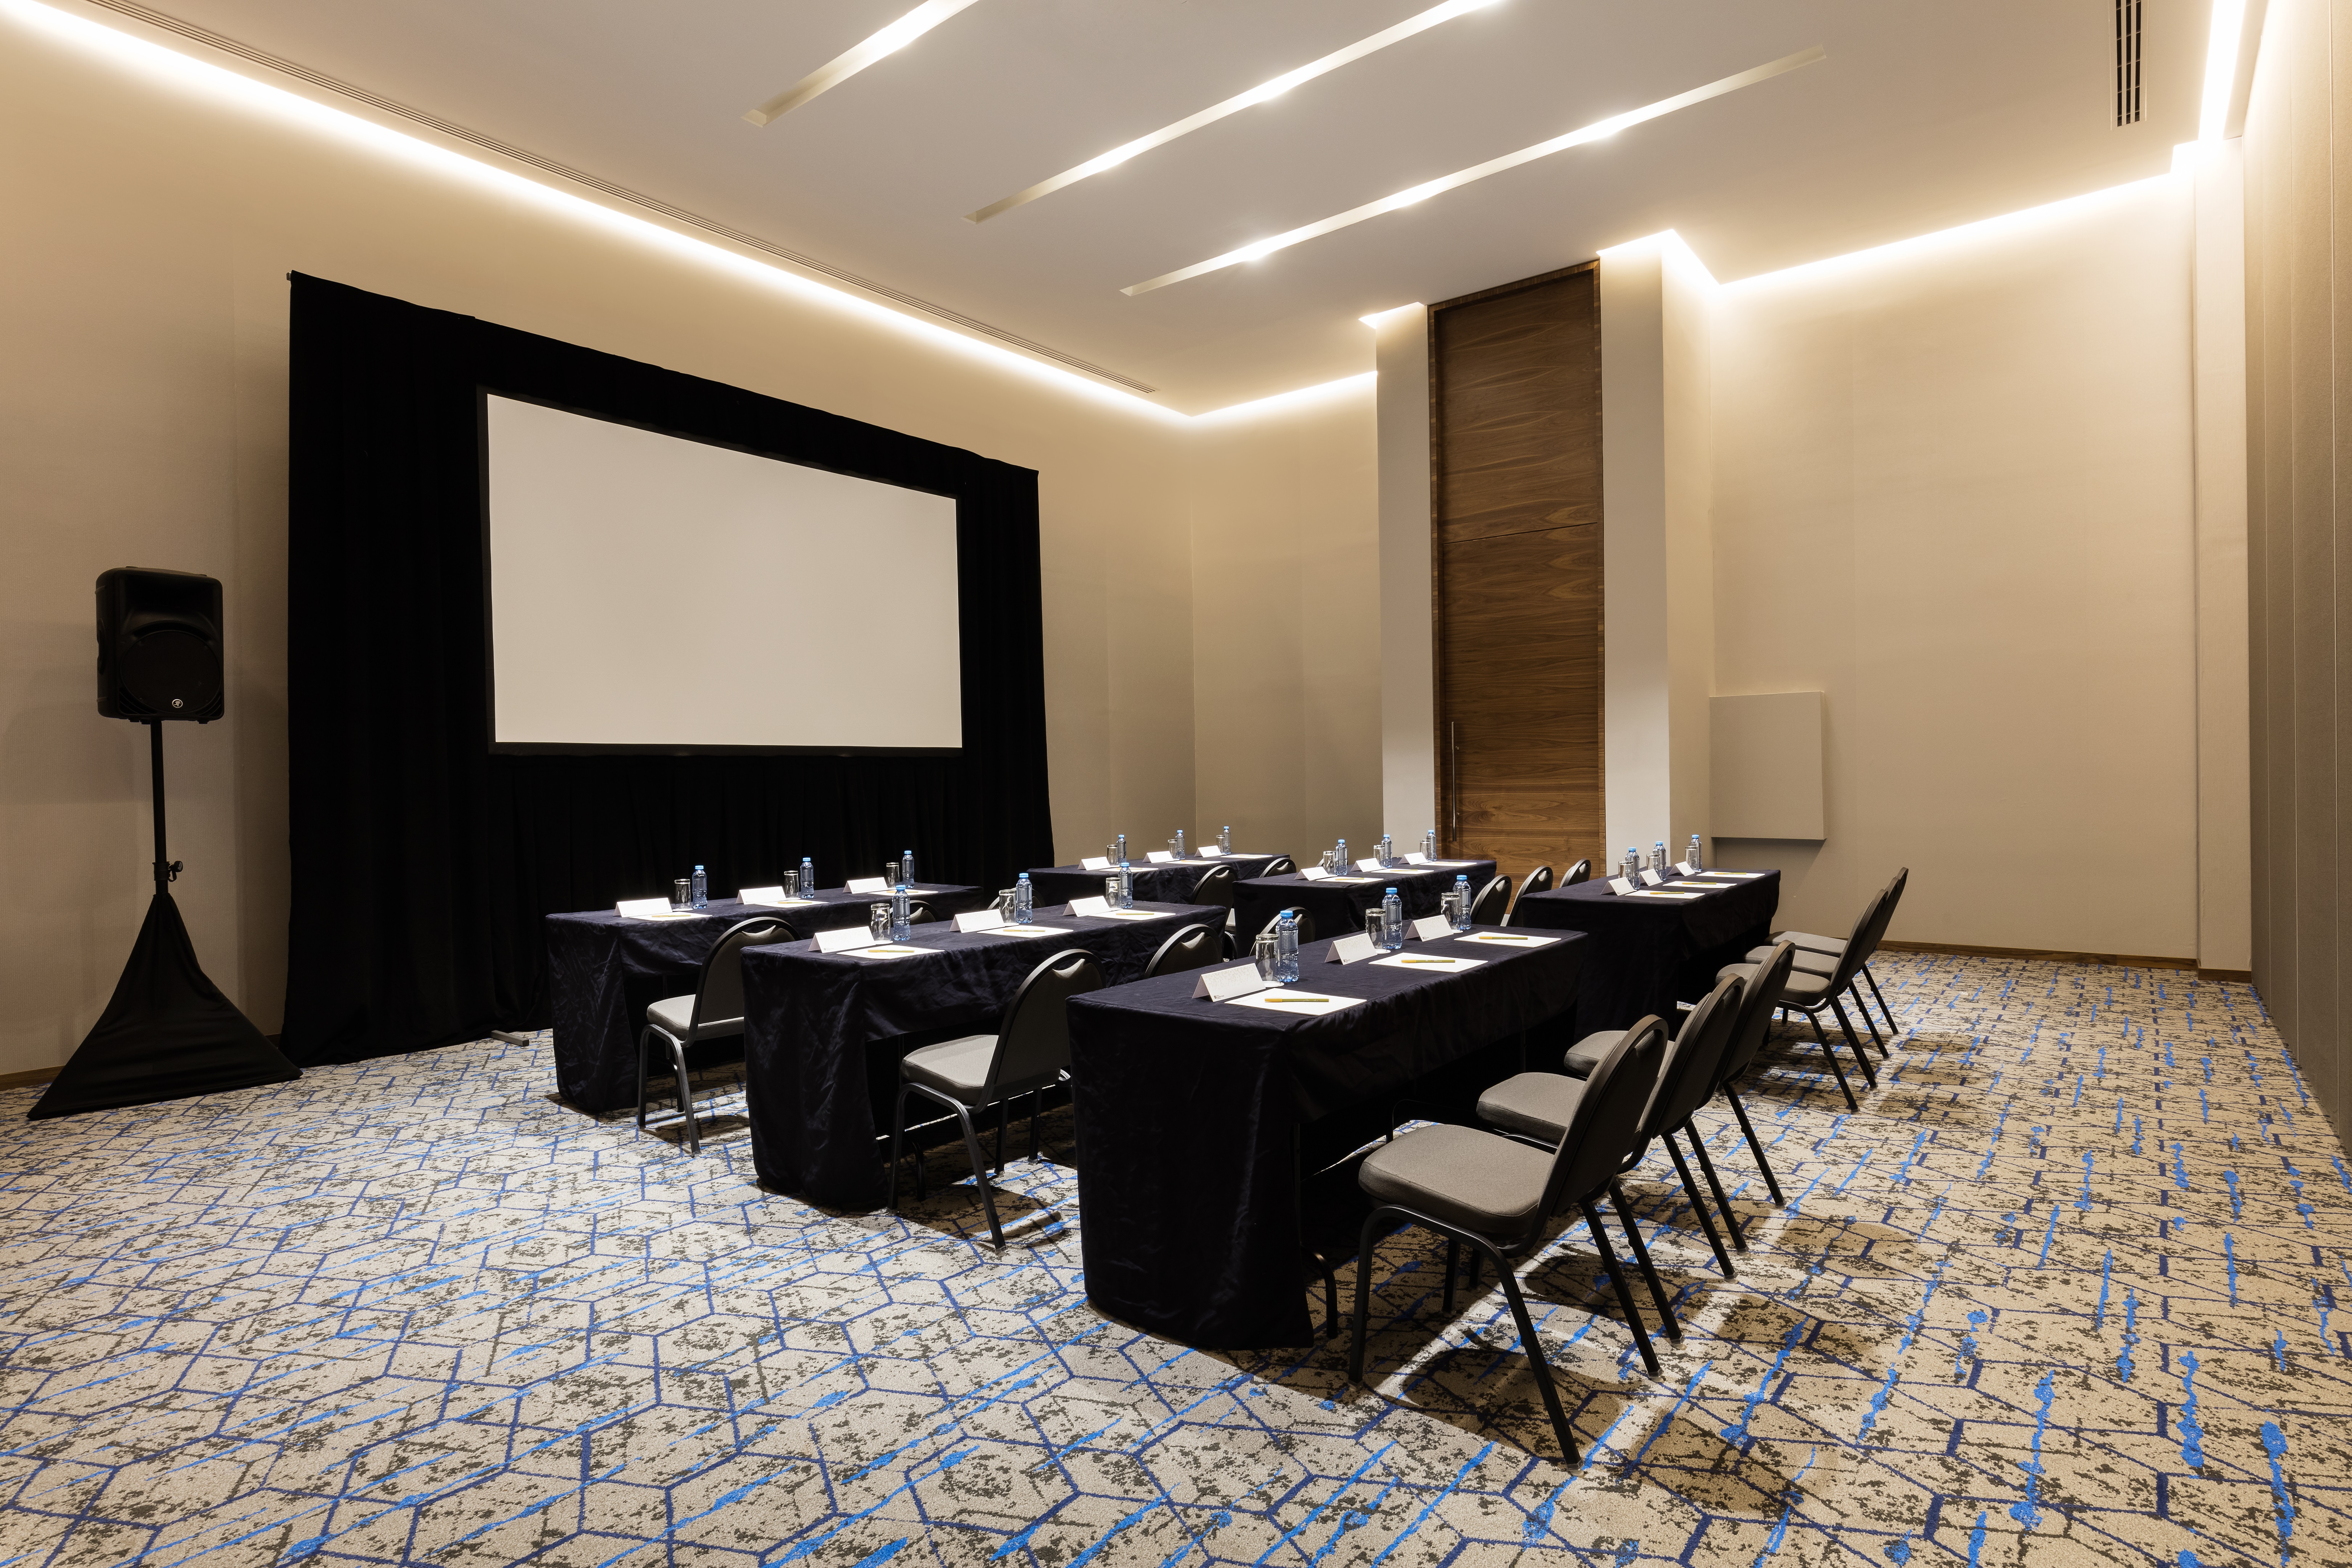 Classroom-Style Tables and Chairs in Yucatan Ballroom Facing Presentation Screen with Side Speakers